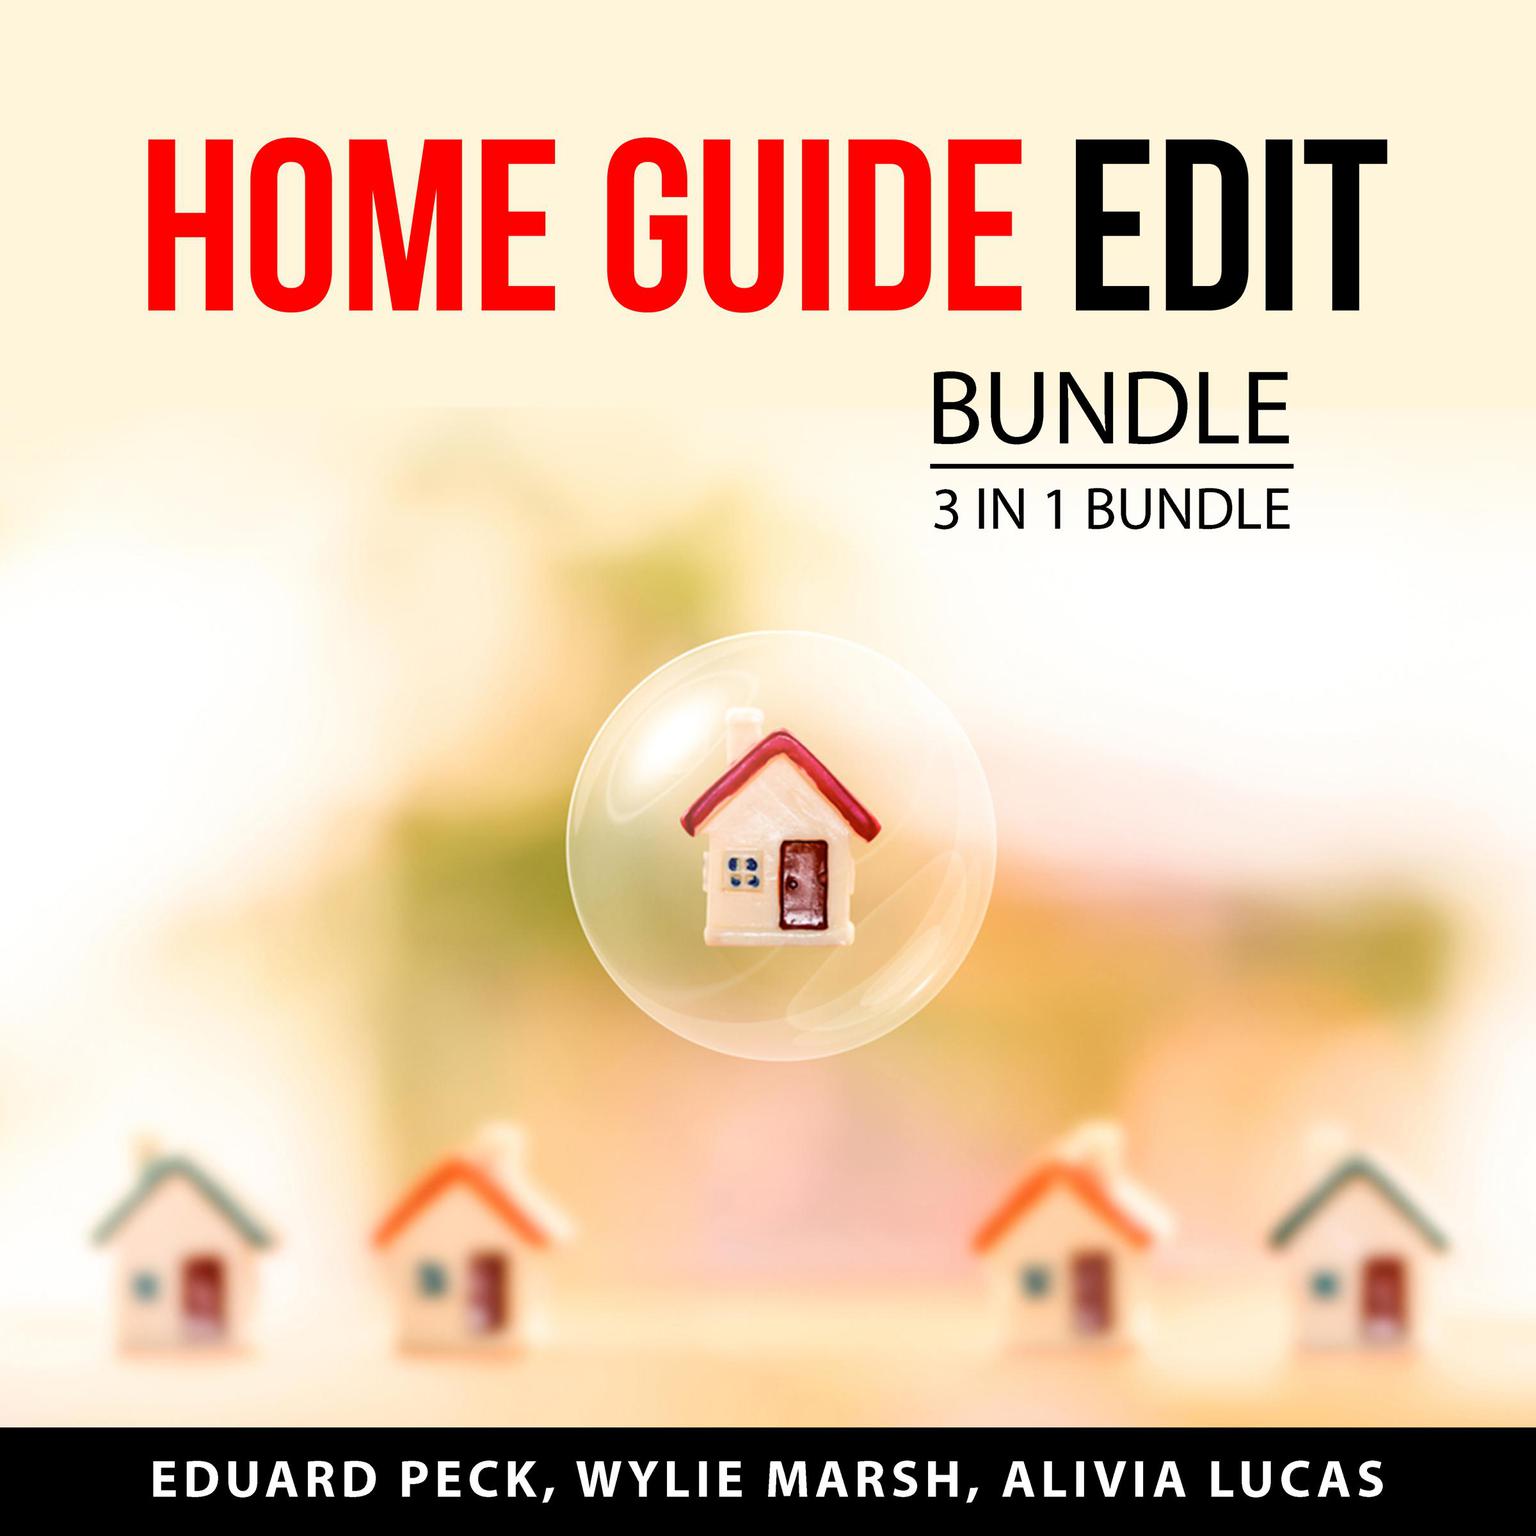 Home Guide Edit Bundle, 3 in 1 Bundle: Guide to Home Repair, Home Security Solutions, and Inspire Your Home Audiobook, by Eduard Peck